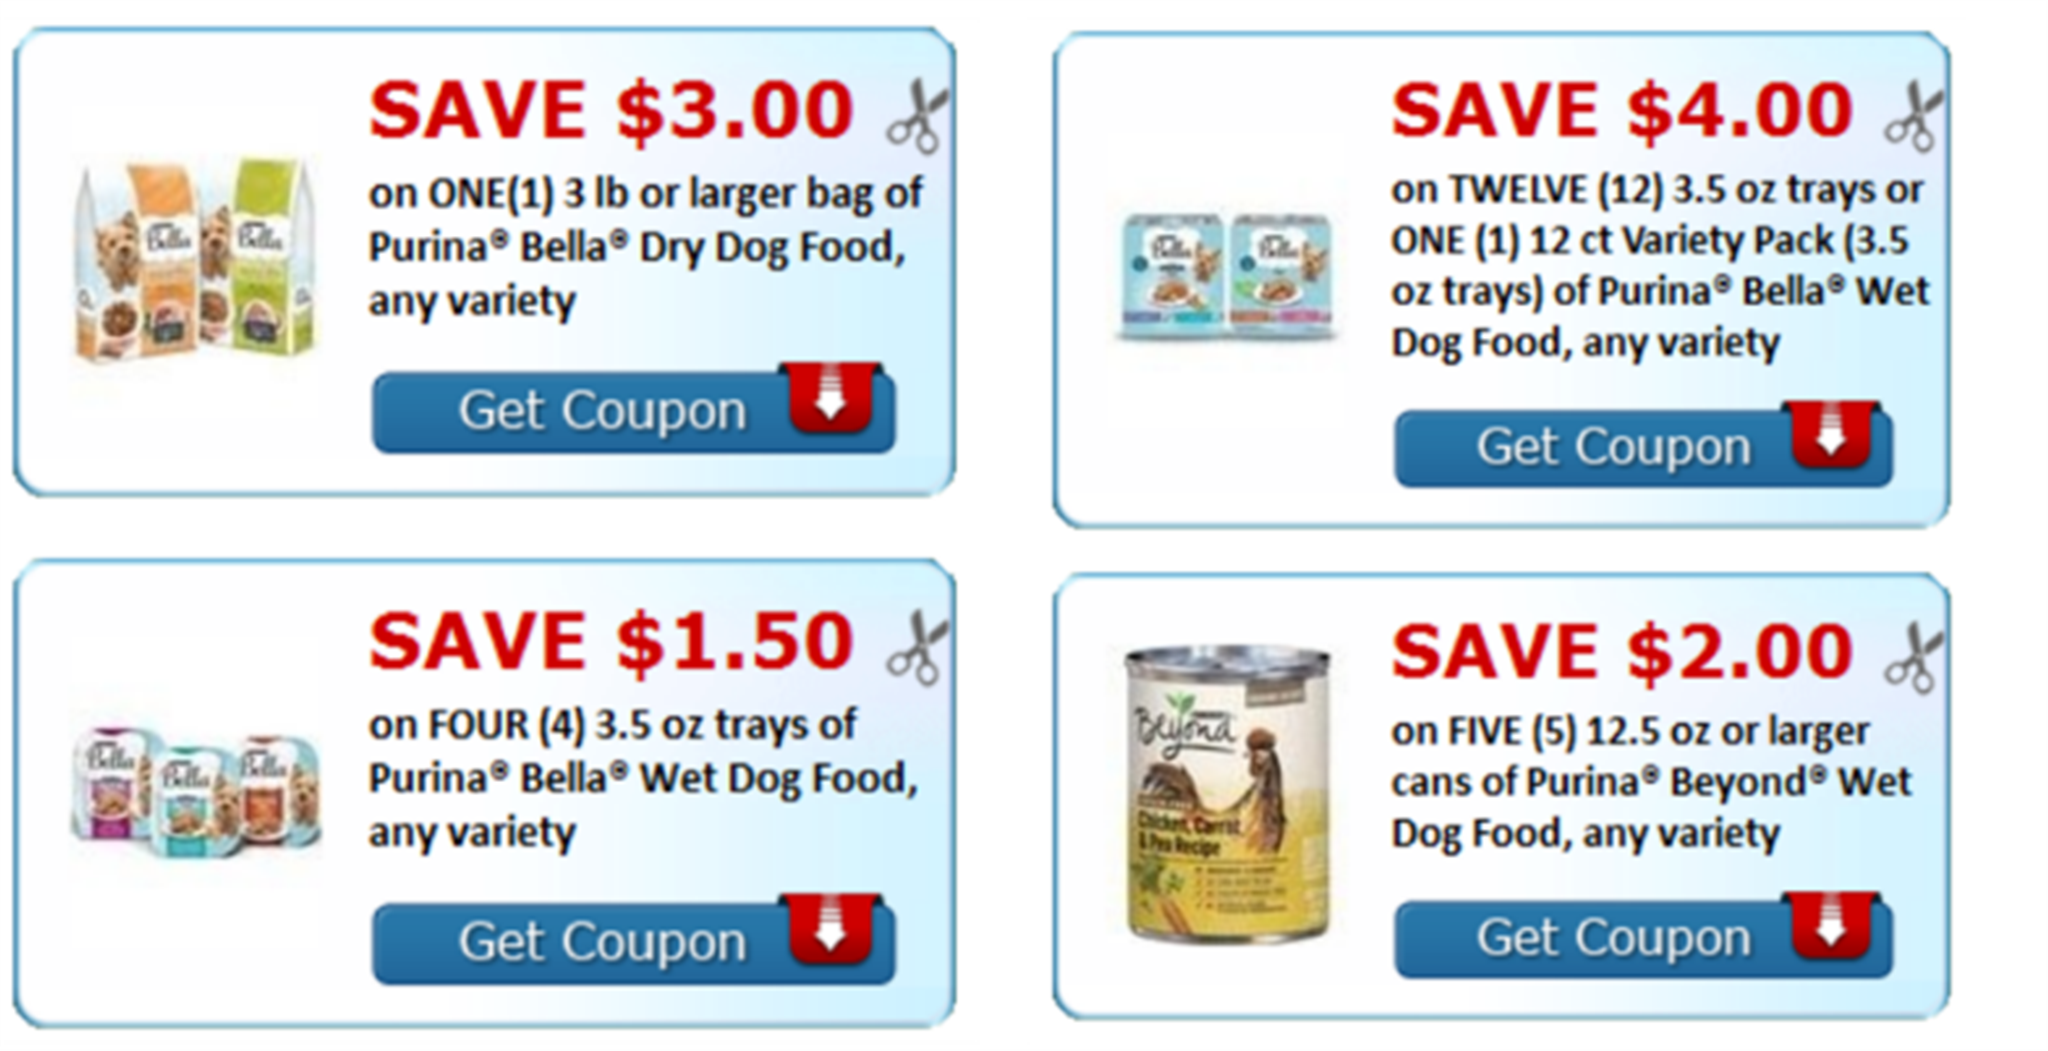 coupons for kitchen and bath authority